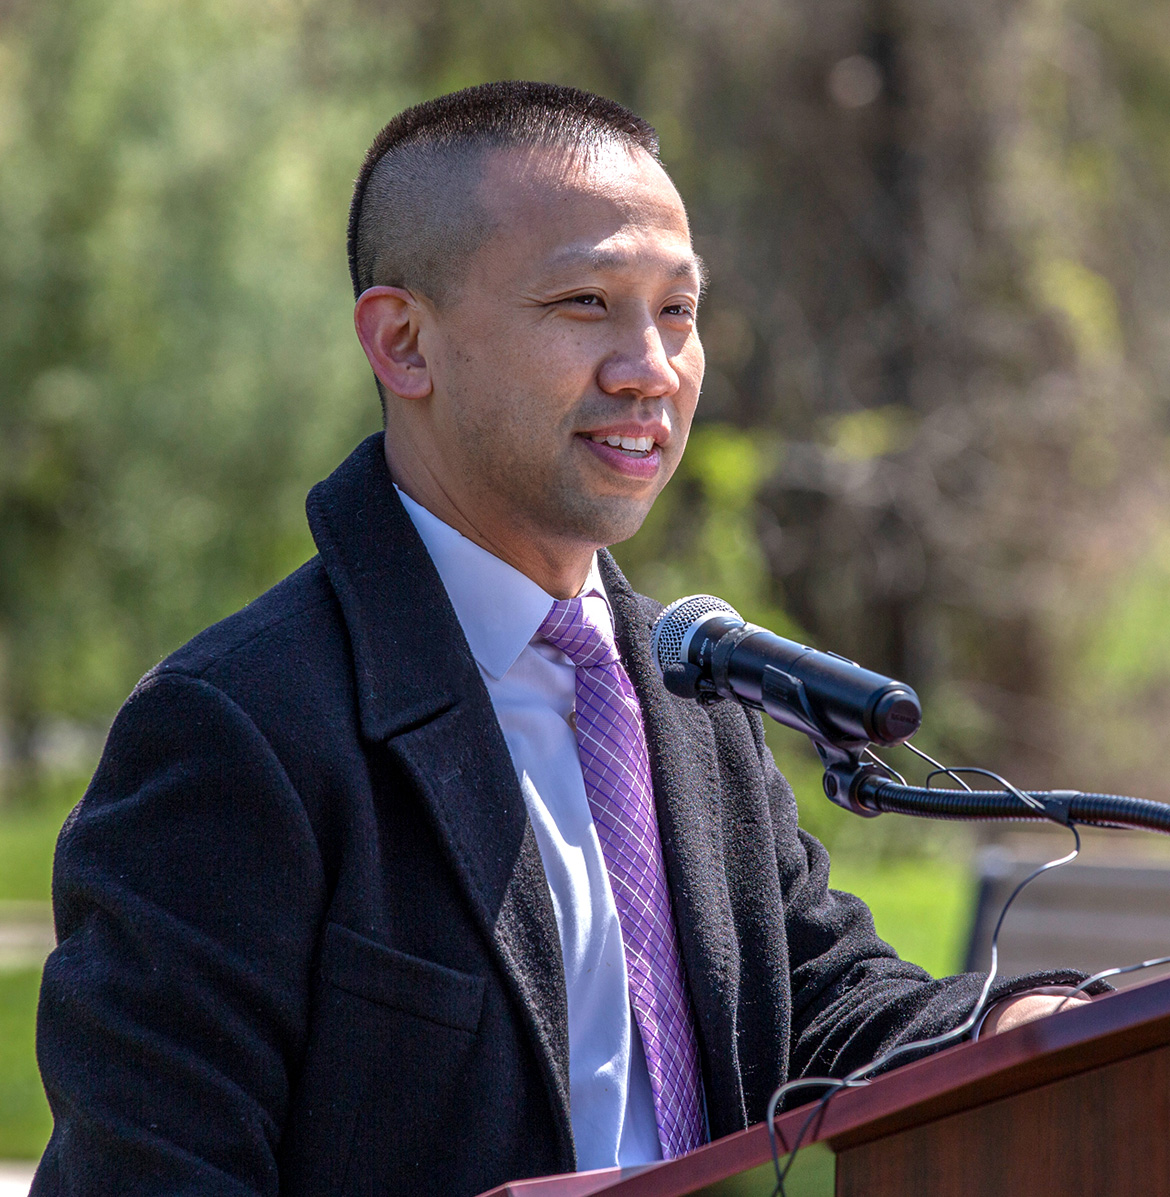 Clarence Lam for Congress, Maryland 3rd Congressional District